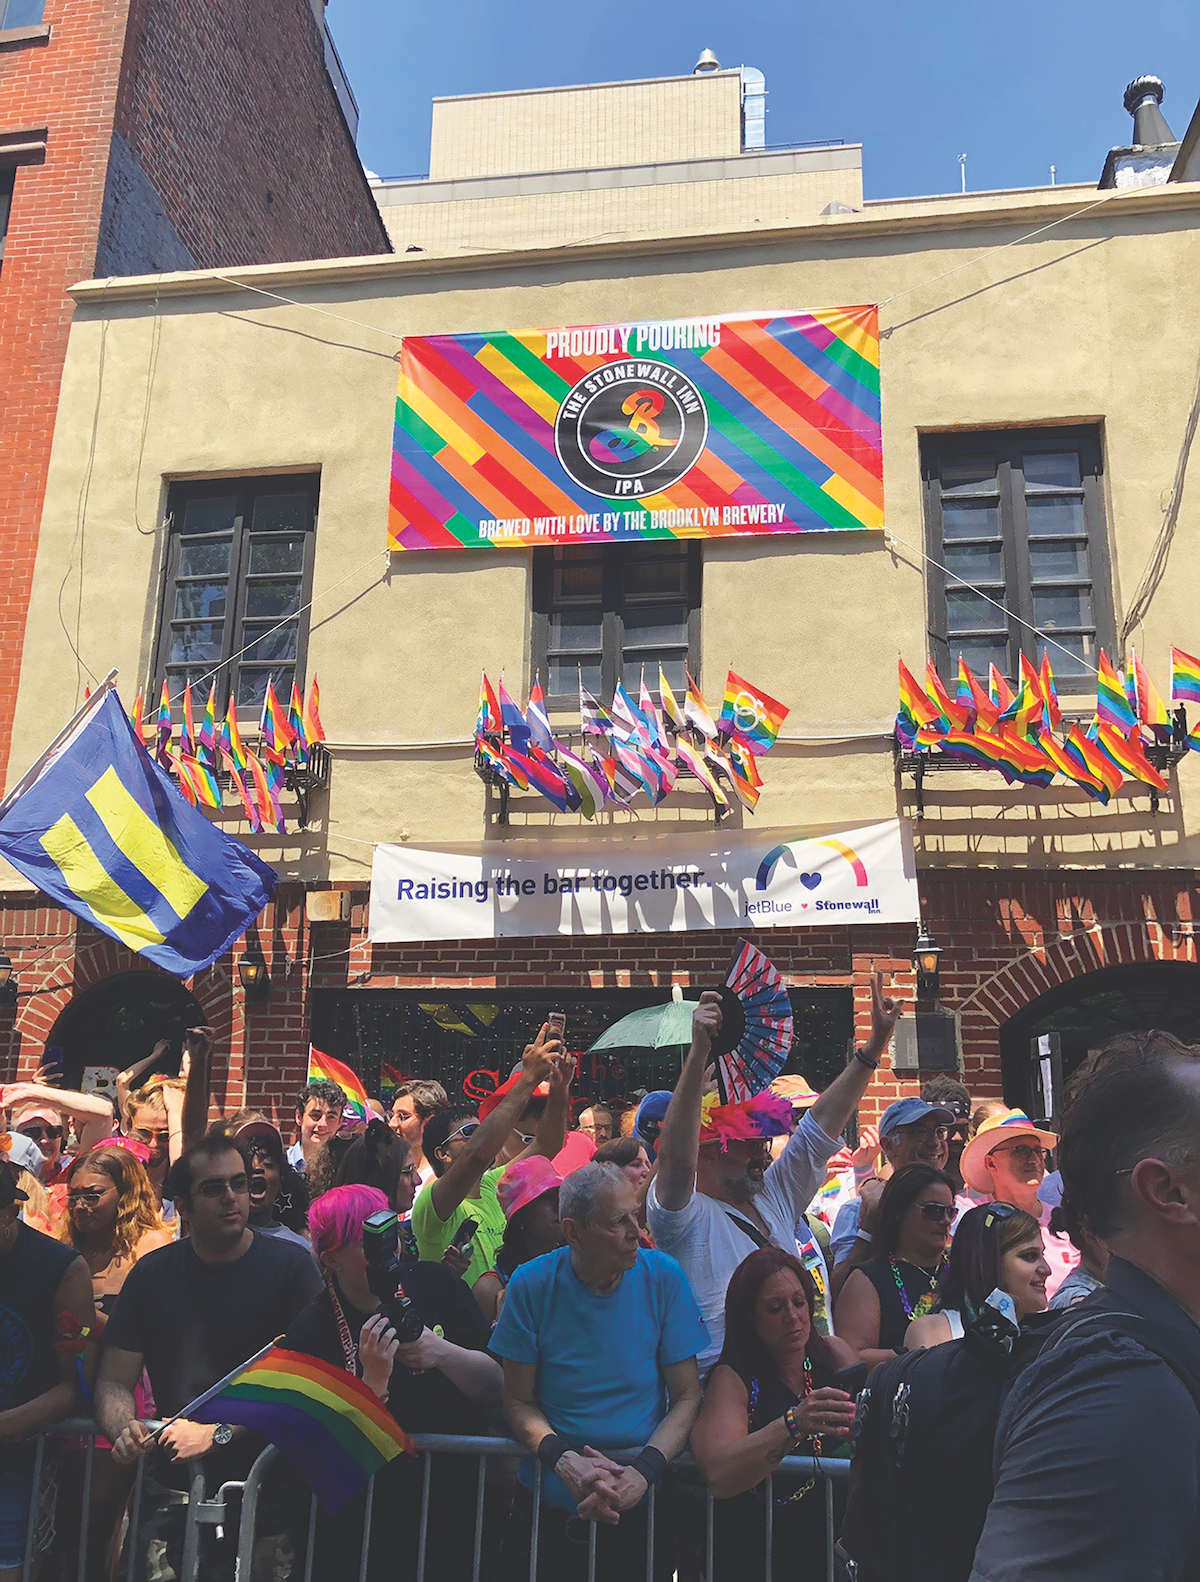 Pride participants celebrating outside of The Stonewall Inn, where the modern gay rights movement began in 1969.